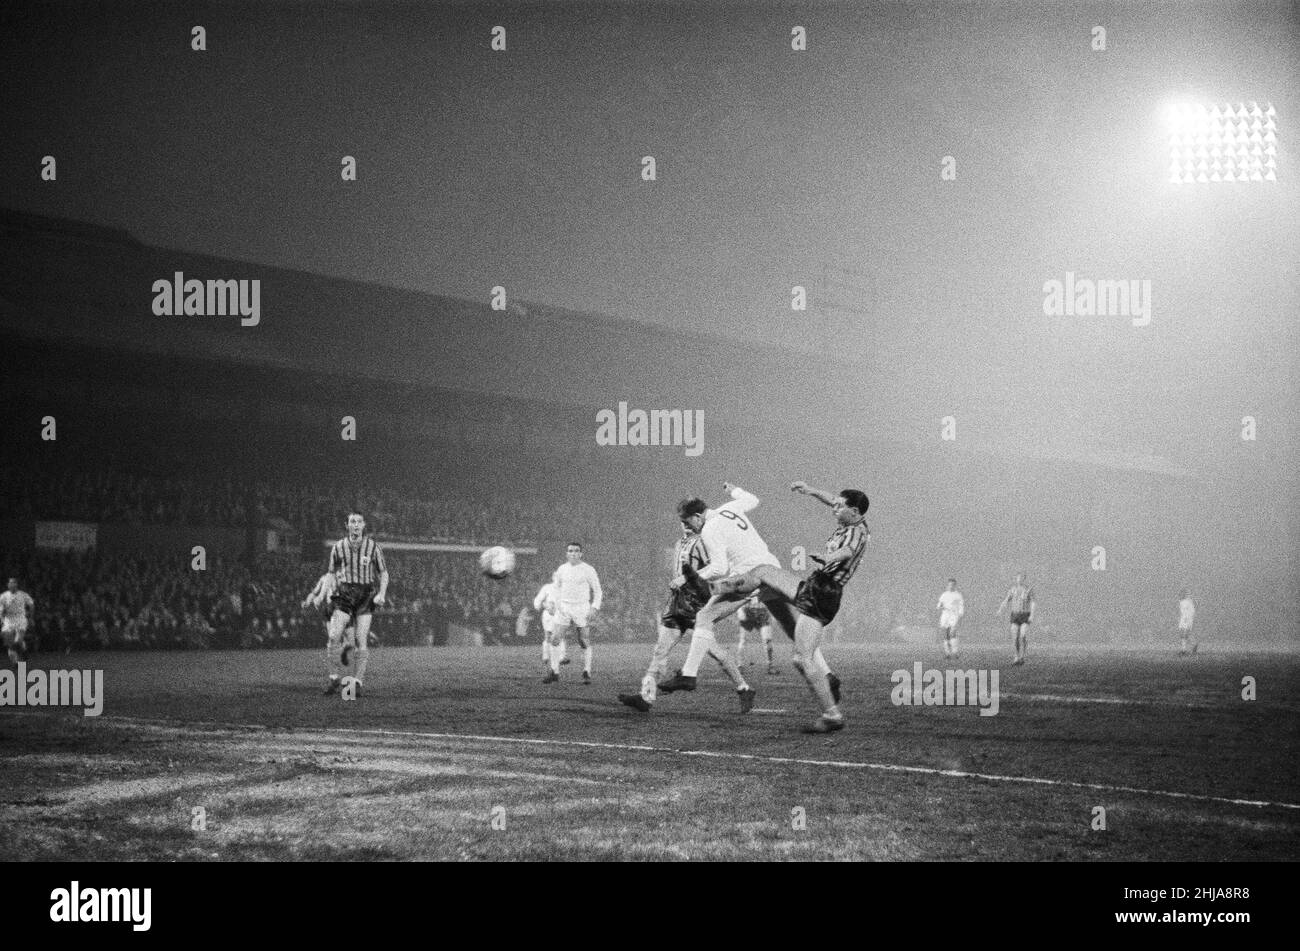 Crystal Palace played Real Madrid at Selhurst Park, on the night of 18th April 1962, to mark the new floodlighting system. The final score was Crystal Palace 3 Real Madrid 4. Pictured scoring a goal with his head for Real madrid is legendary forward Alfredo Di Stefano. Stock Photo